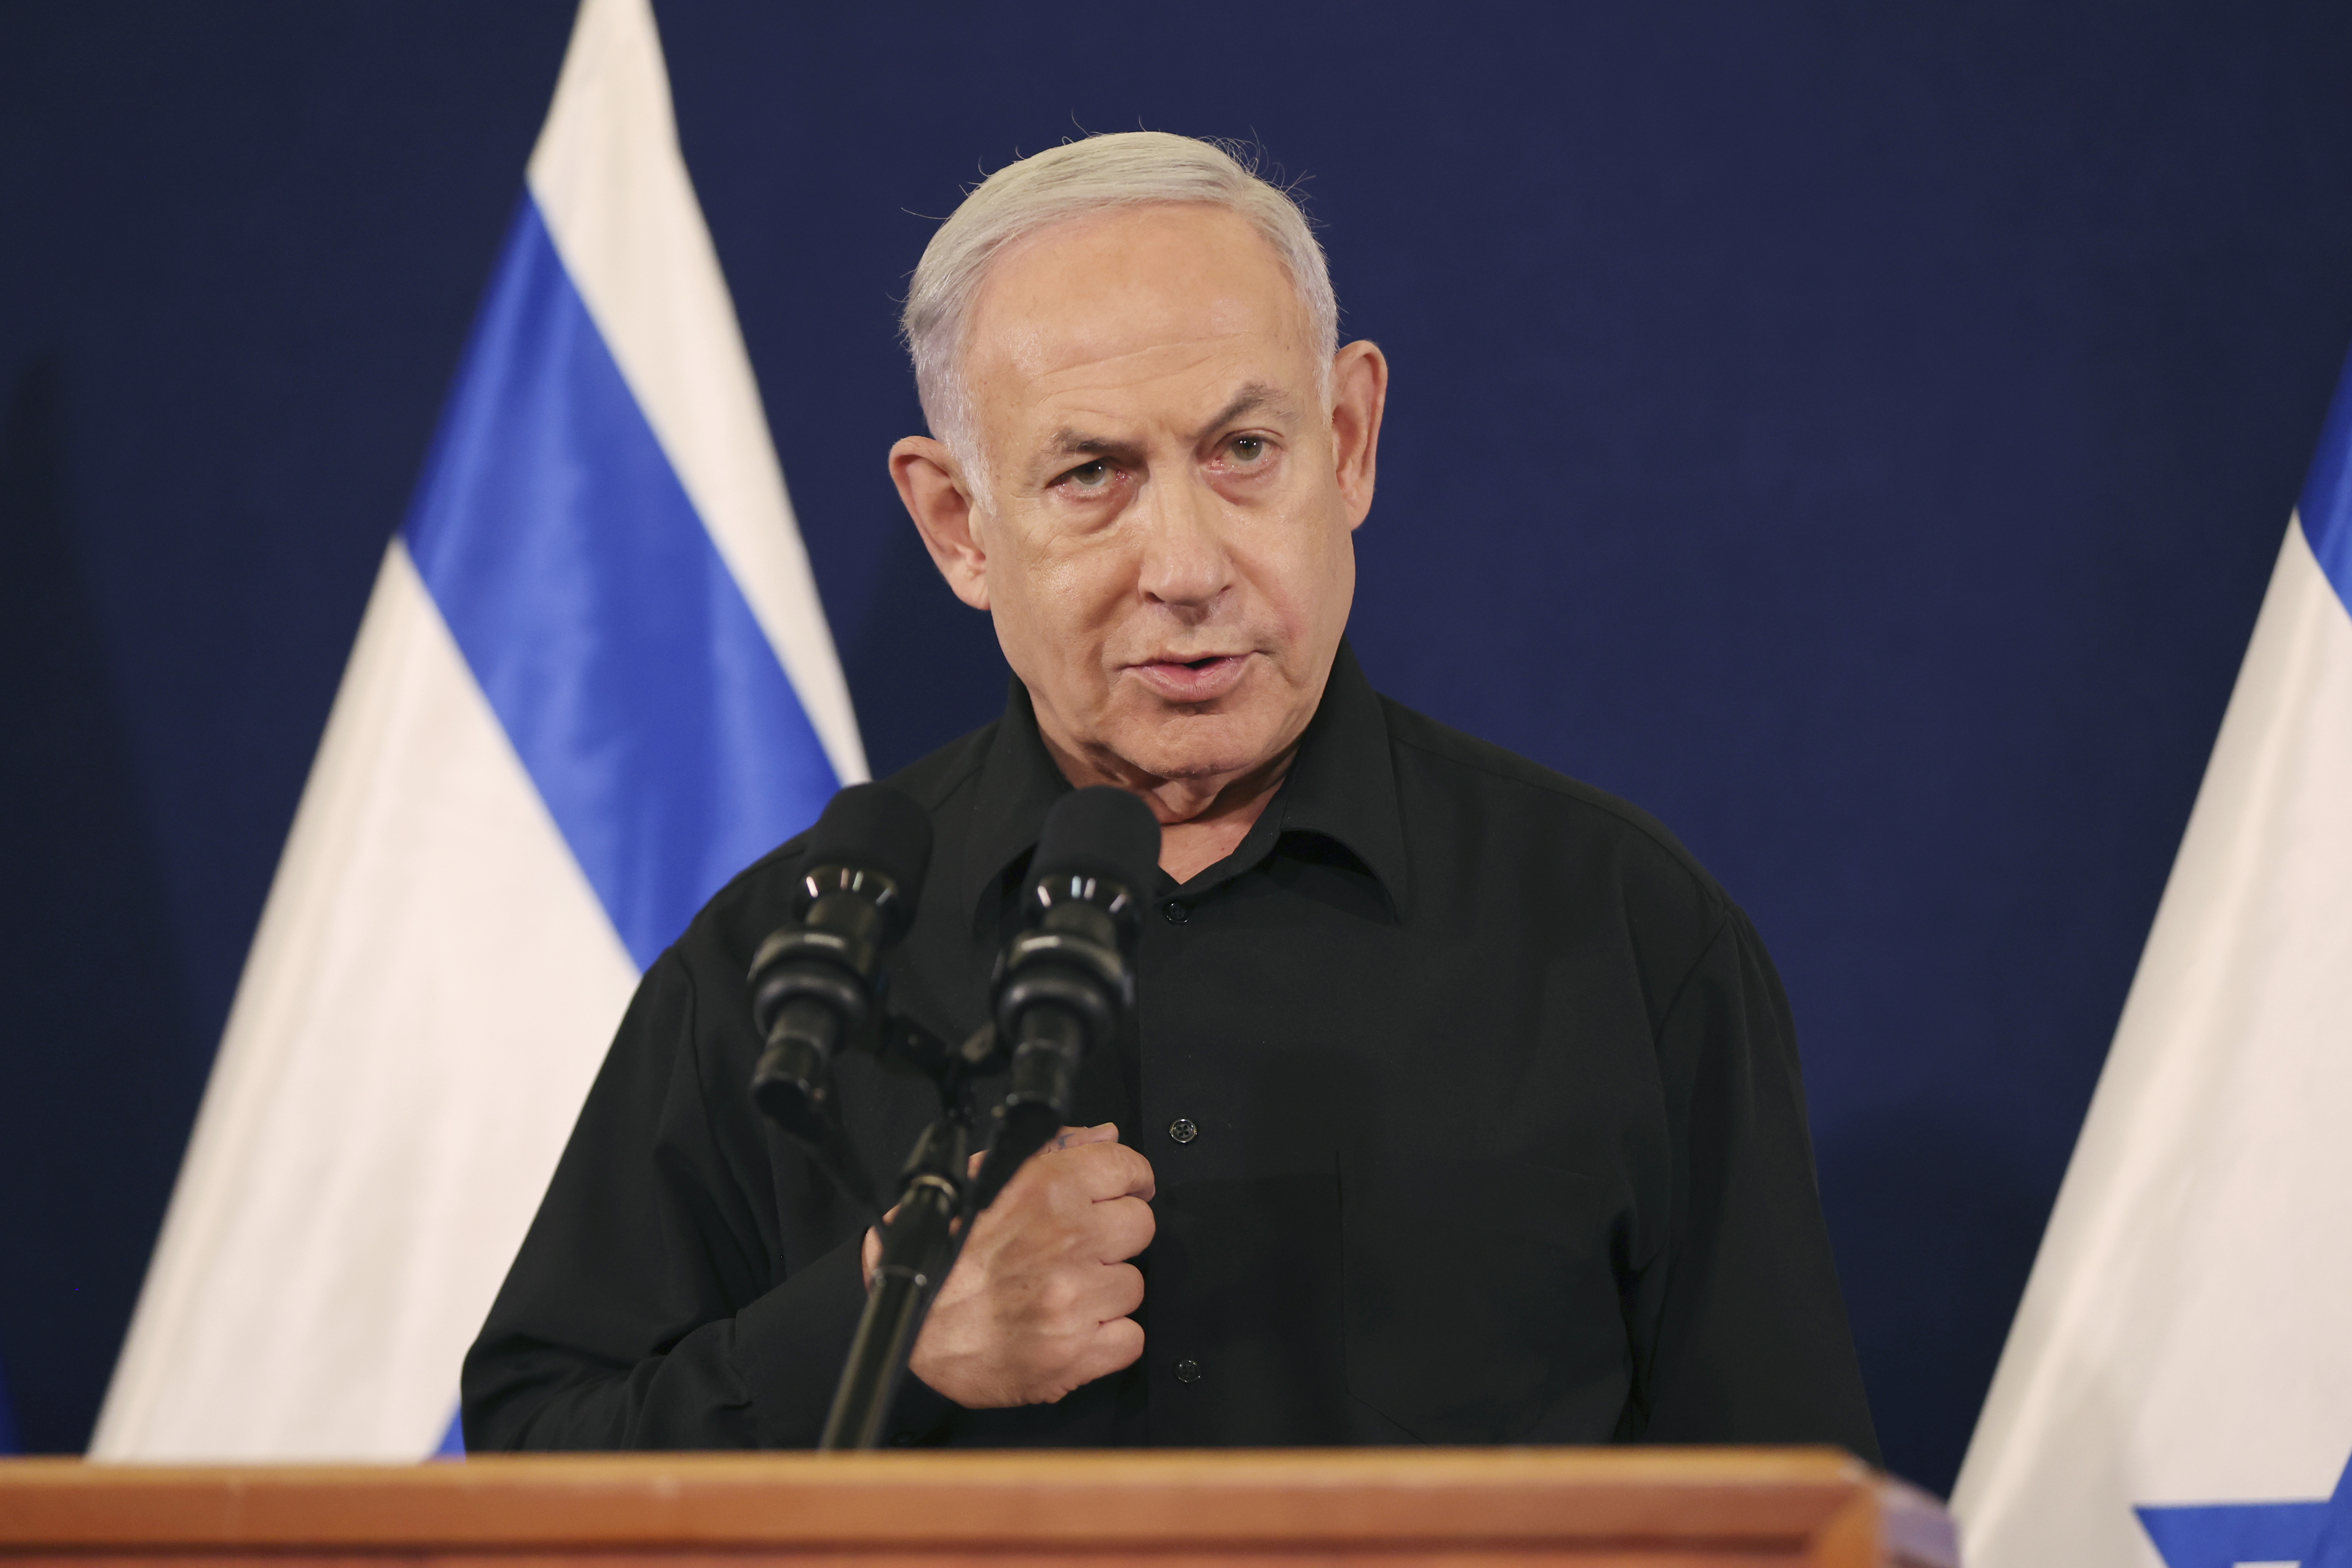 FILE - Israeli Prime Minister Benjamin Netanyahu speaks during a news conference in the Kirya military base in Tel Aviv, Israel, on Oct. 28, 2023. The departure of Benny Gantz, a centrist member of Israel's three-member War Cabinet, after eight months spent in Israel's war cabinet does not immediately appear to challenge government but does put pressure on Netanyahu. His resignation will likely embolden and empower Israel's radical ultranationalist cabinet ministers who have fiercely opposed all cease-fire deals. (Abir Sultan/Pool Photo via AP, File)